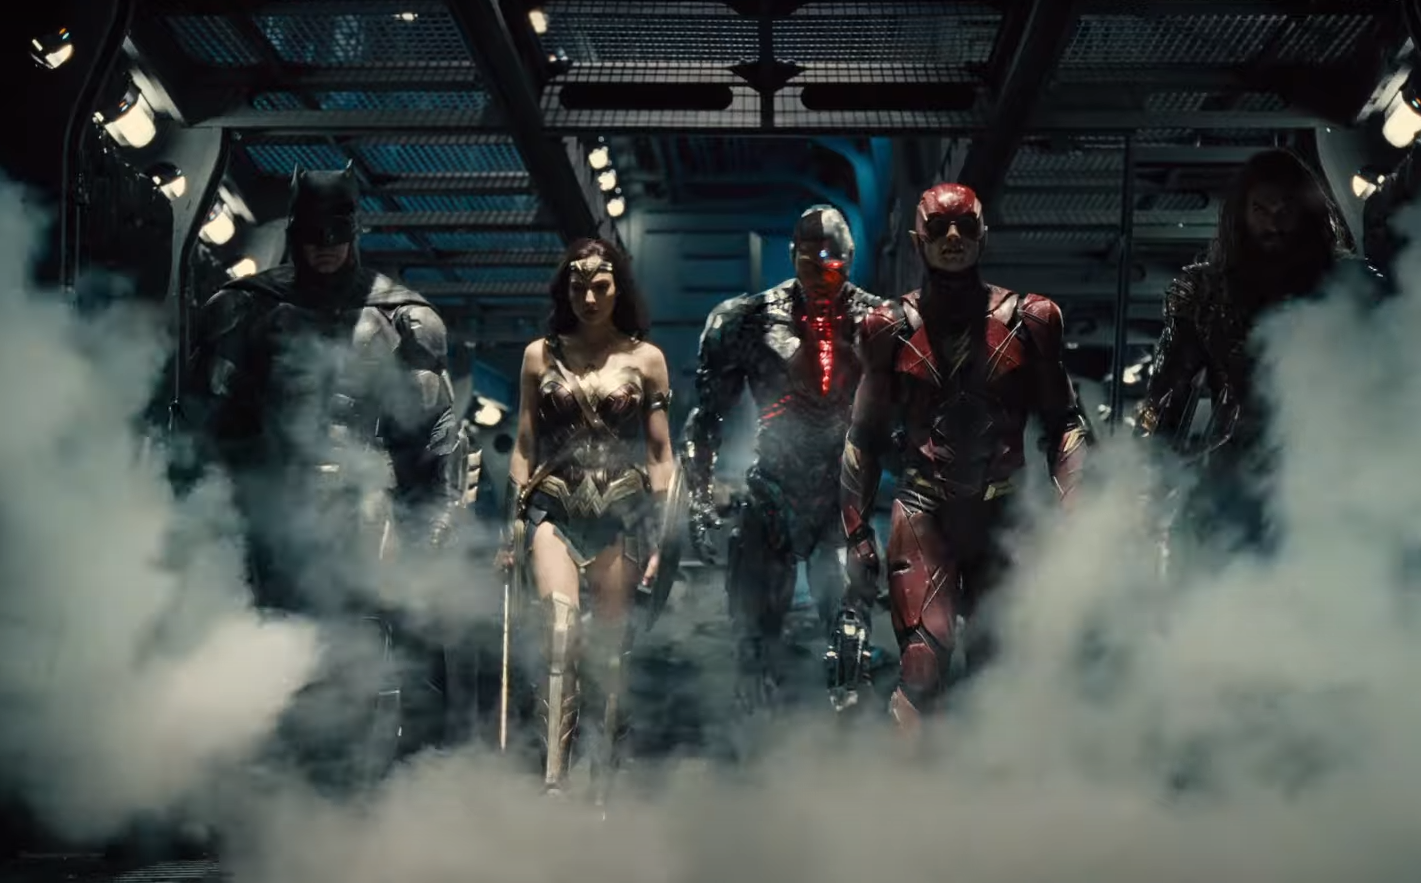 The official Zack Snyder 'Justice League' trailer has arrived